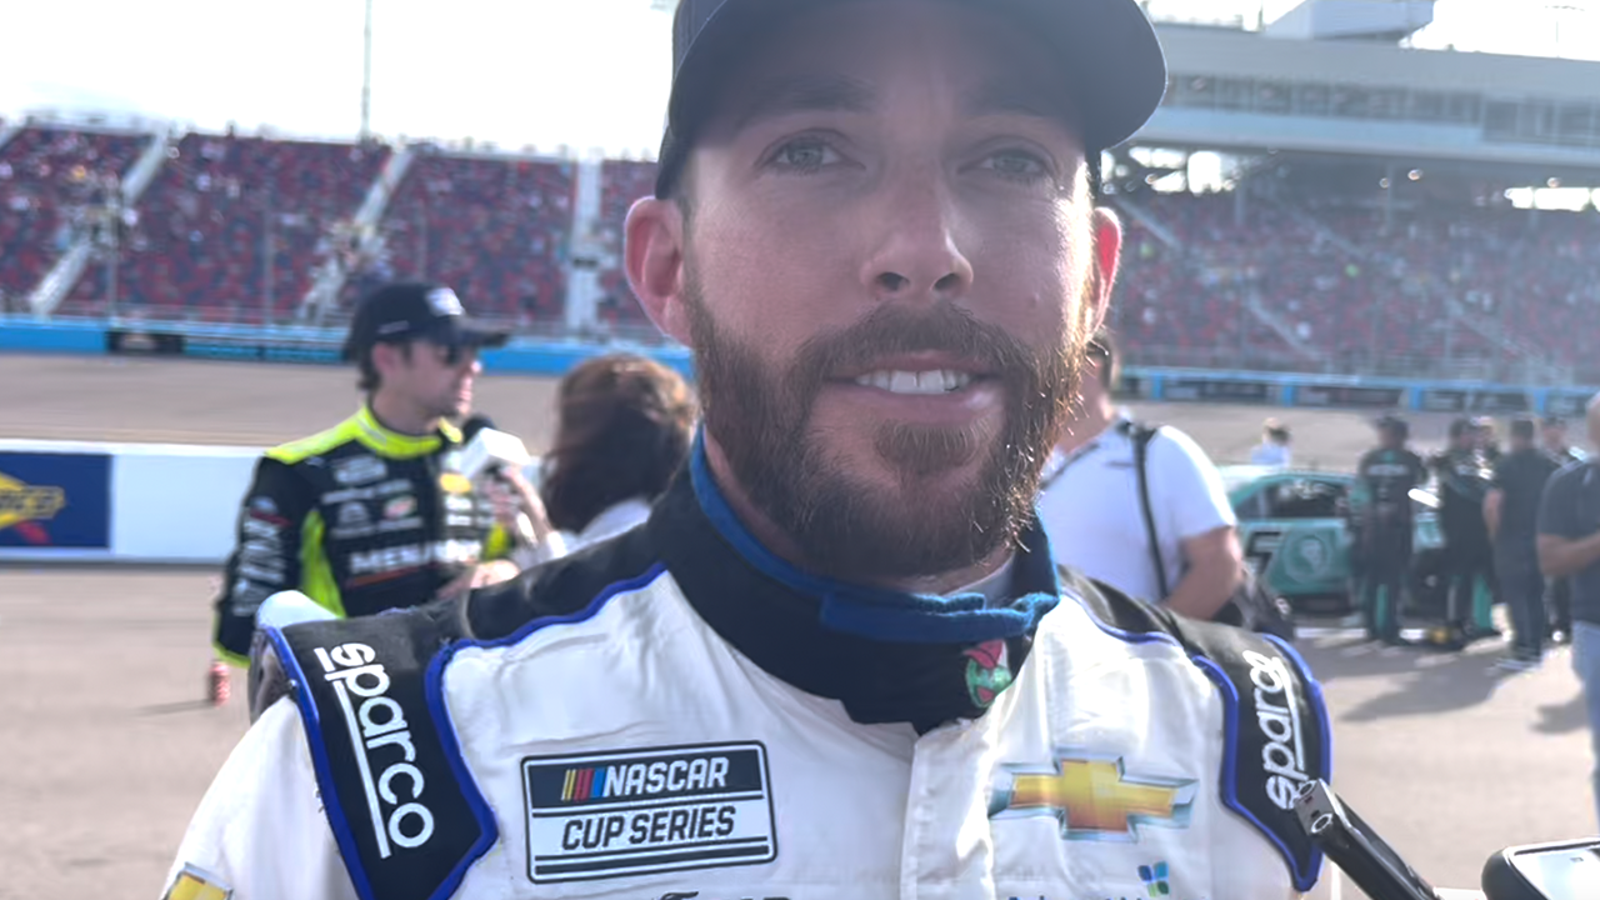 Ross Chastain on final restarts at Phoenix